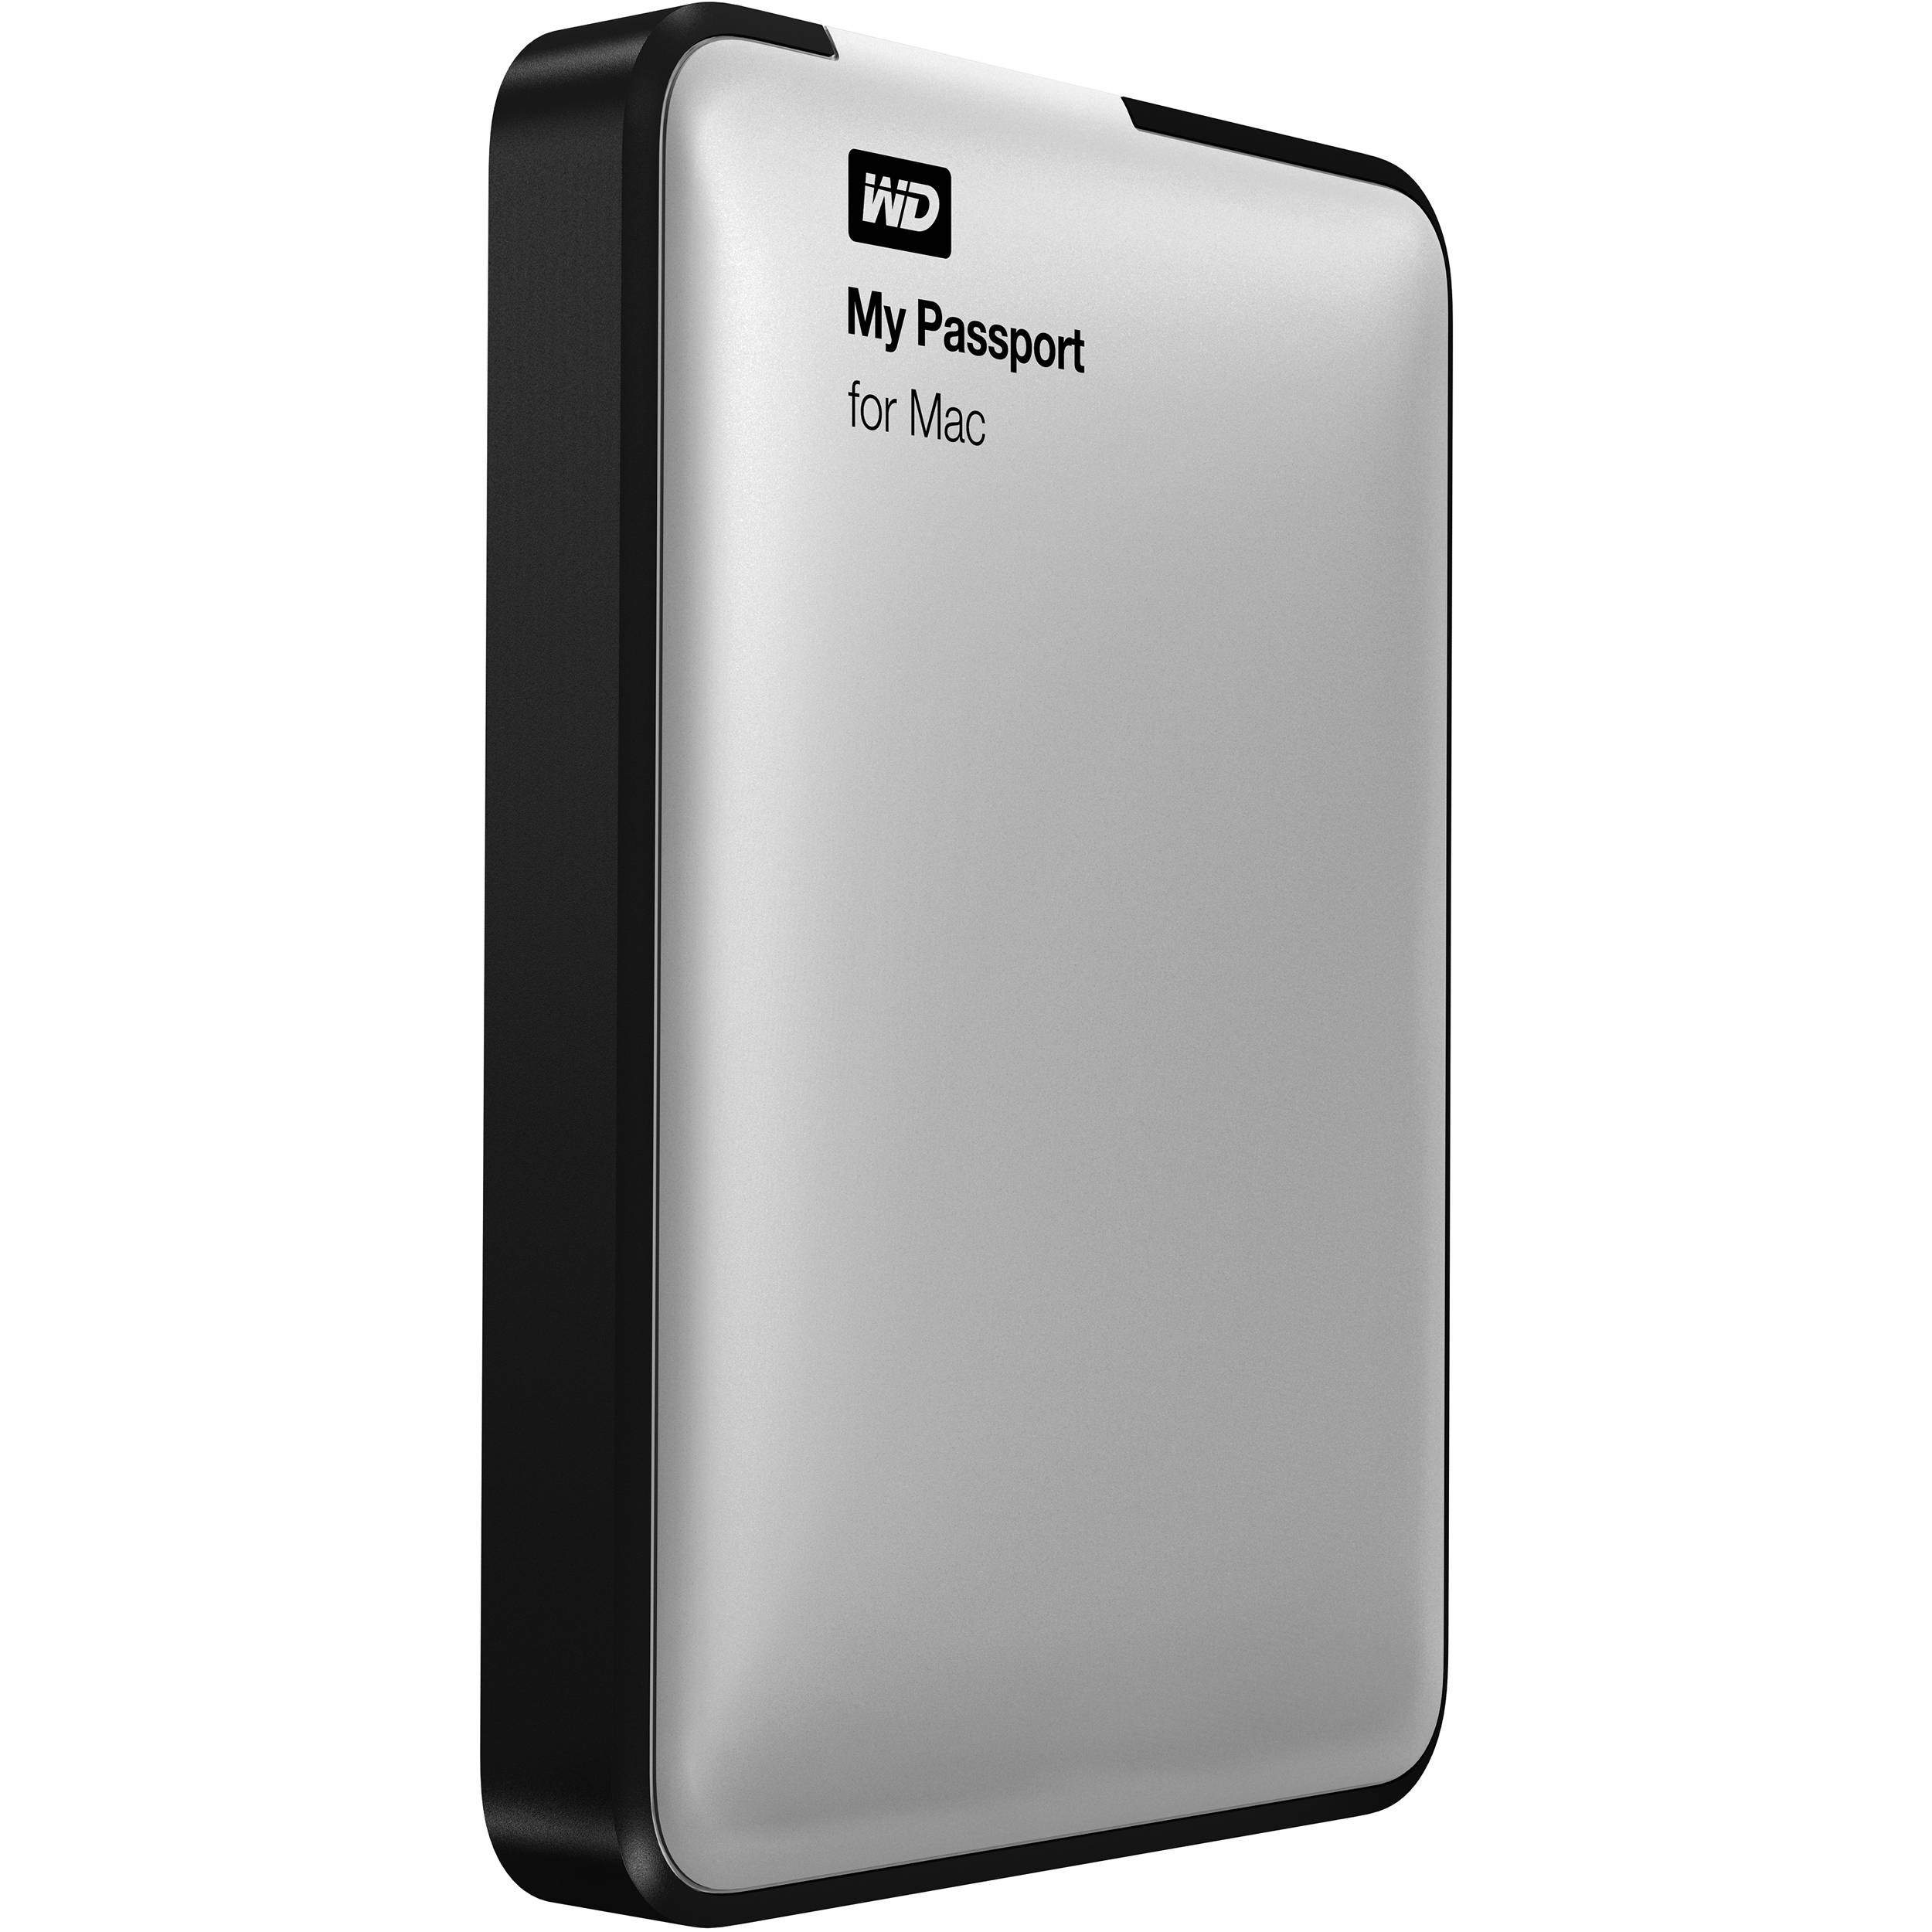 can i use wd my passport for mac on pc